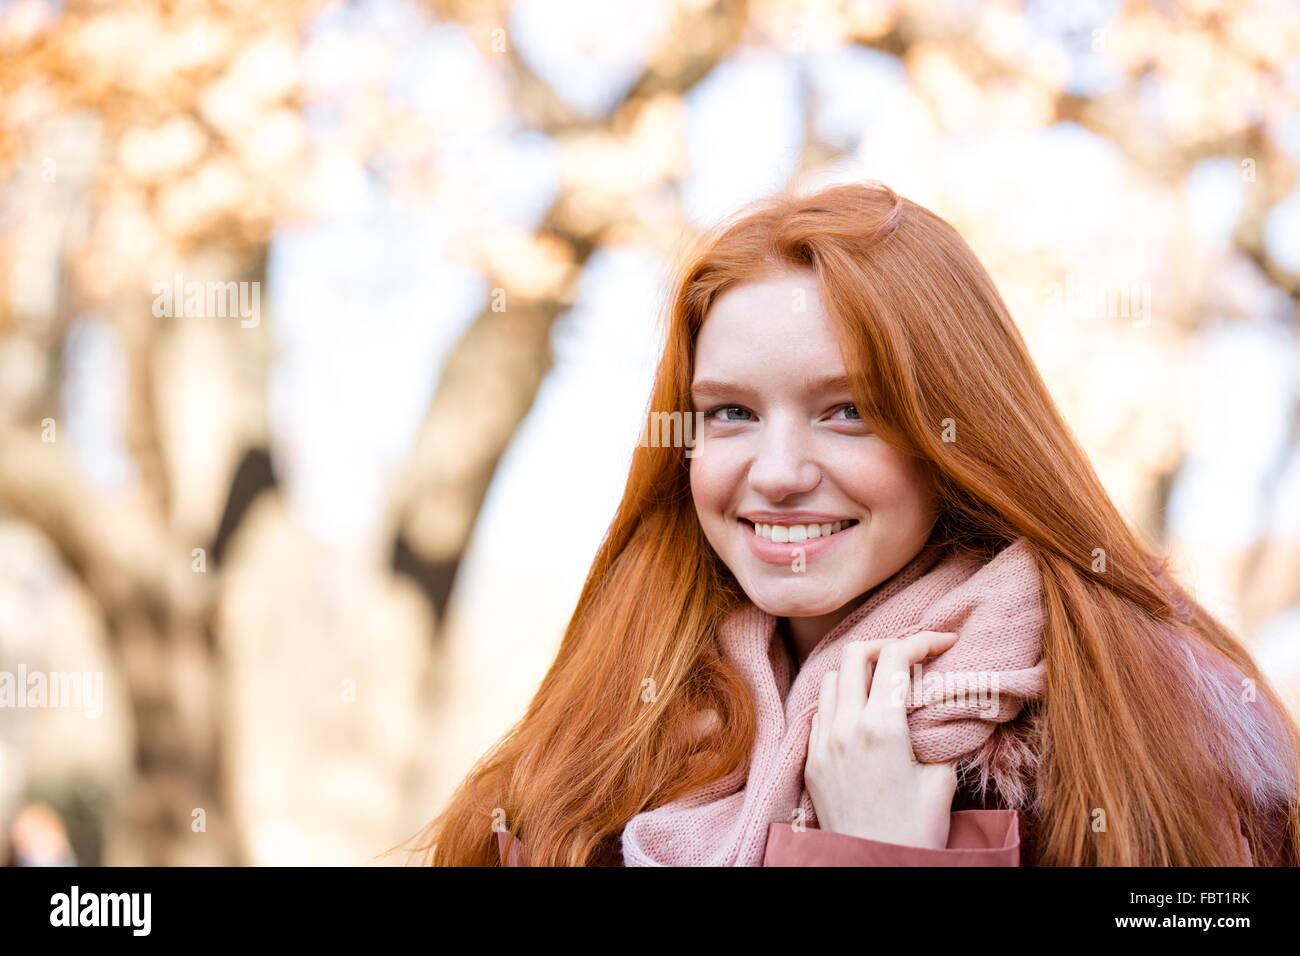 Portrait of a smiling redhead woman looking at camera outdoors Banque D'Images